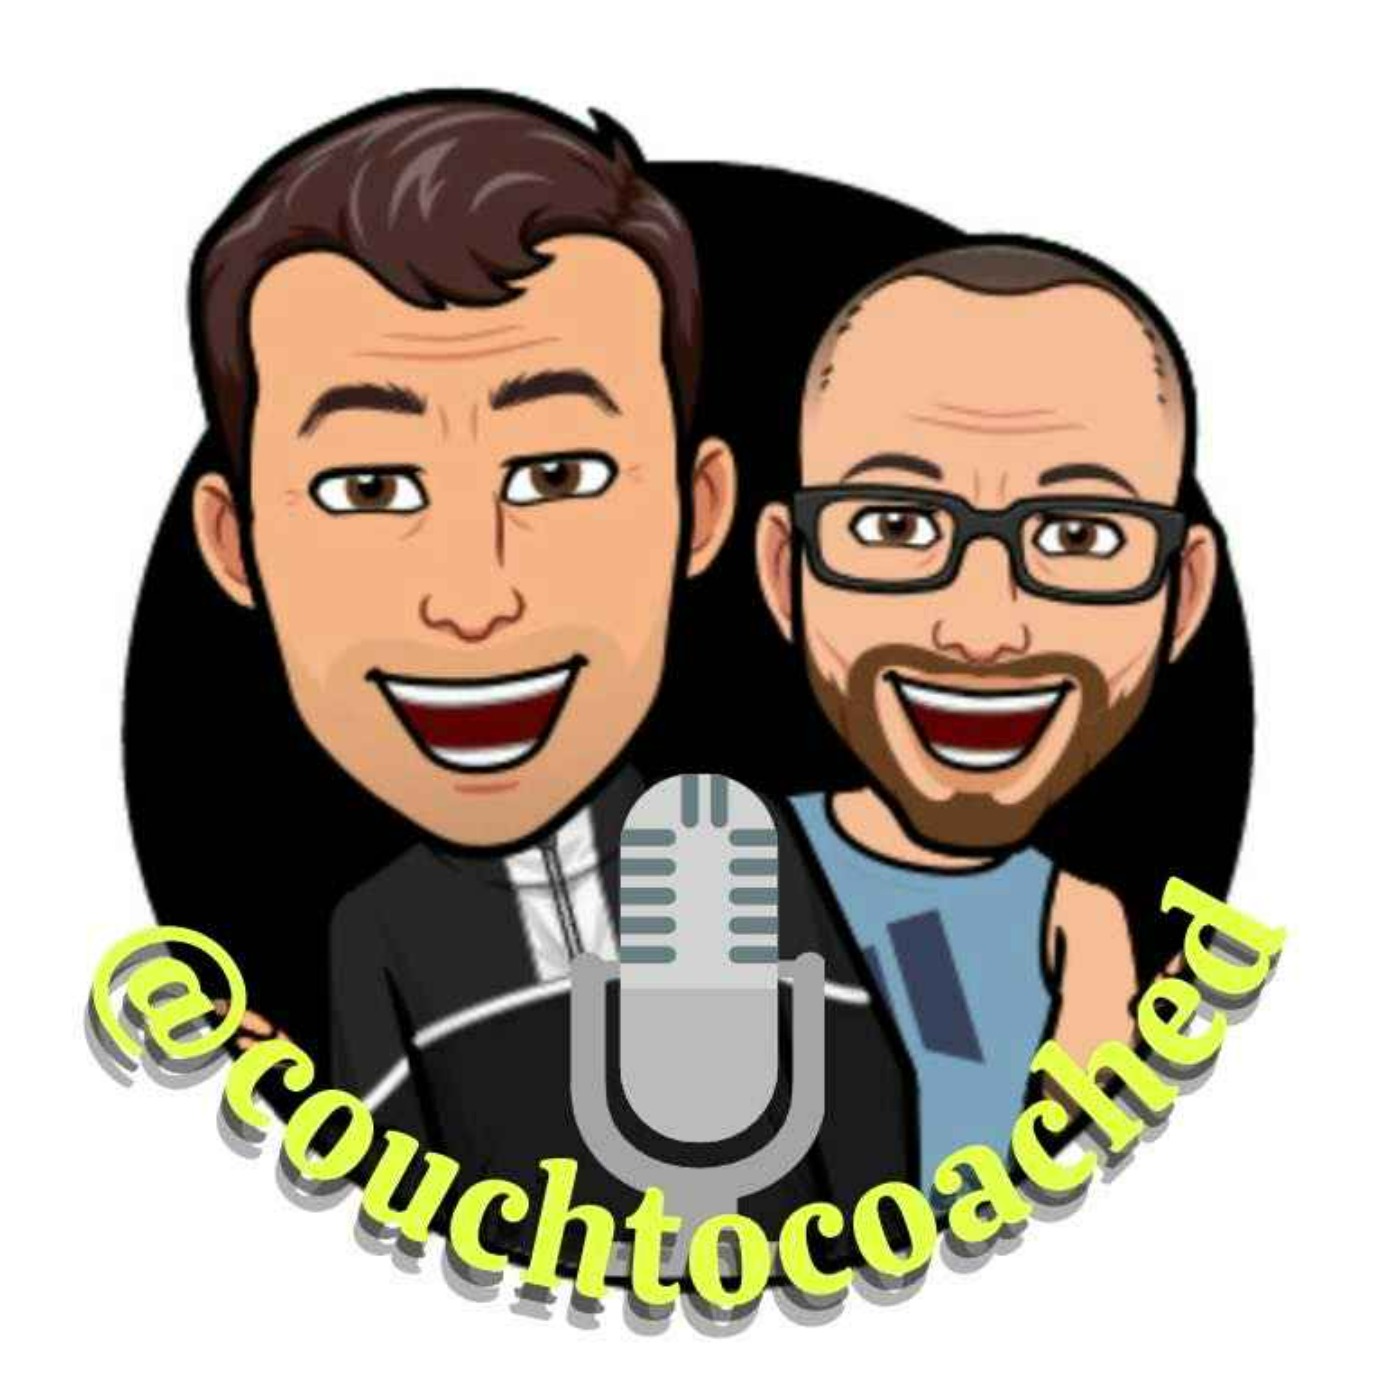 Couch to Coached- Running podcast Christmas special